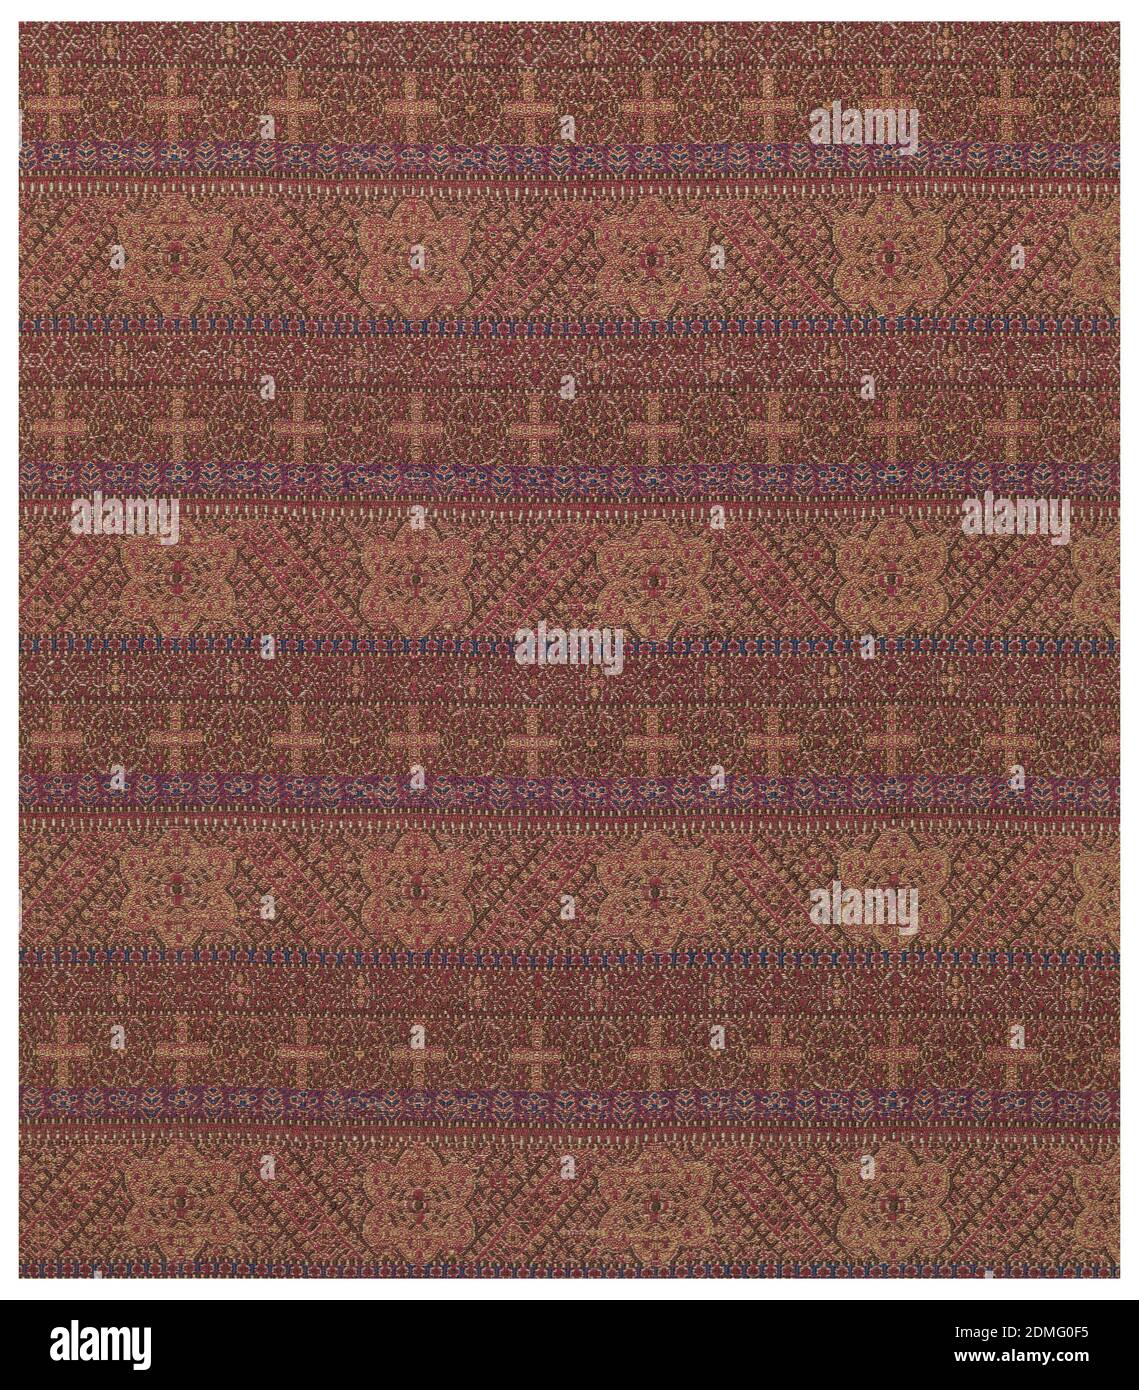 Shawl, Medium: Technique: machine woven, Allover pattern of two alternating bands. Pattern derived from Spanish ornament of the 13th century. Dominant color is a shade of rose-red., England, late 19th century, woven textiles, Shawl Stock Photo